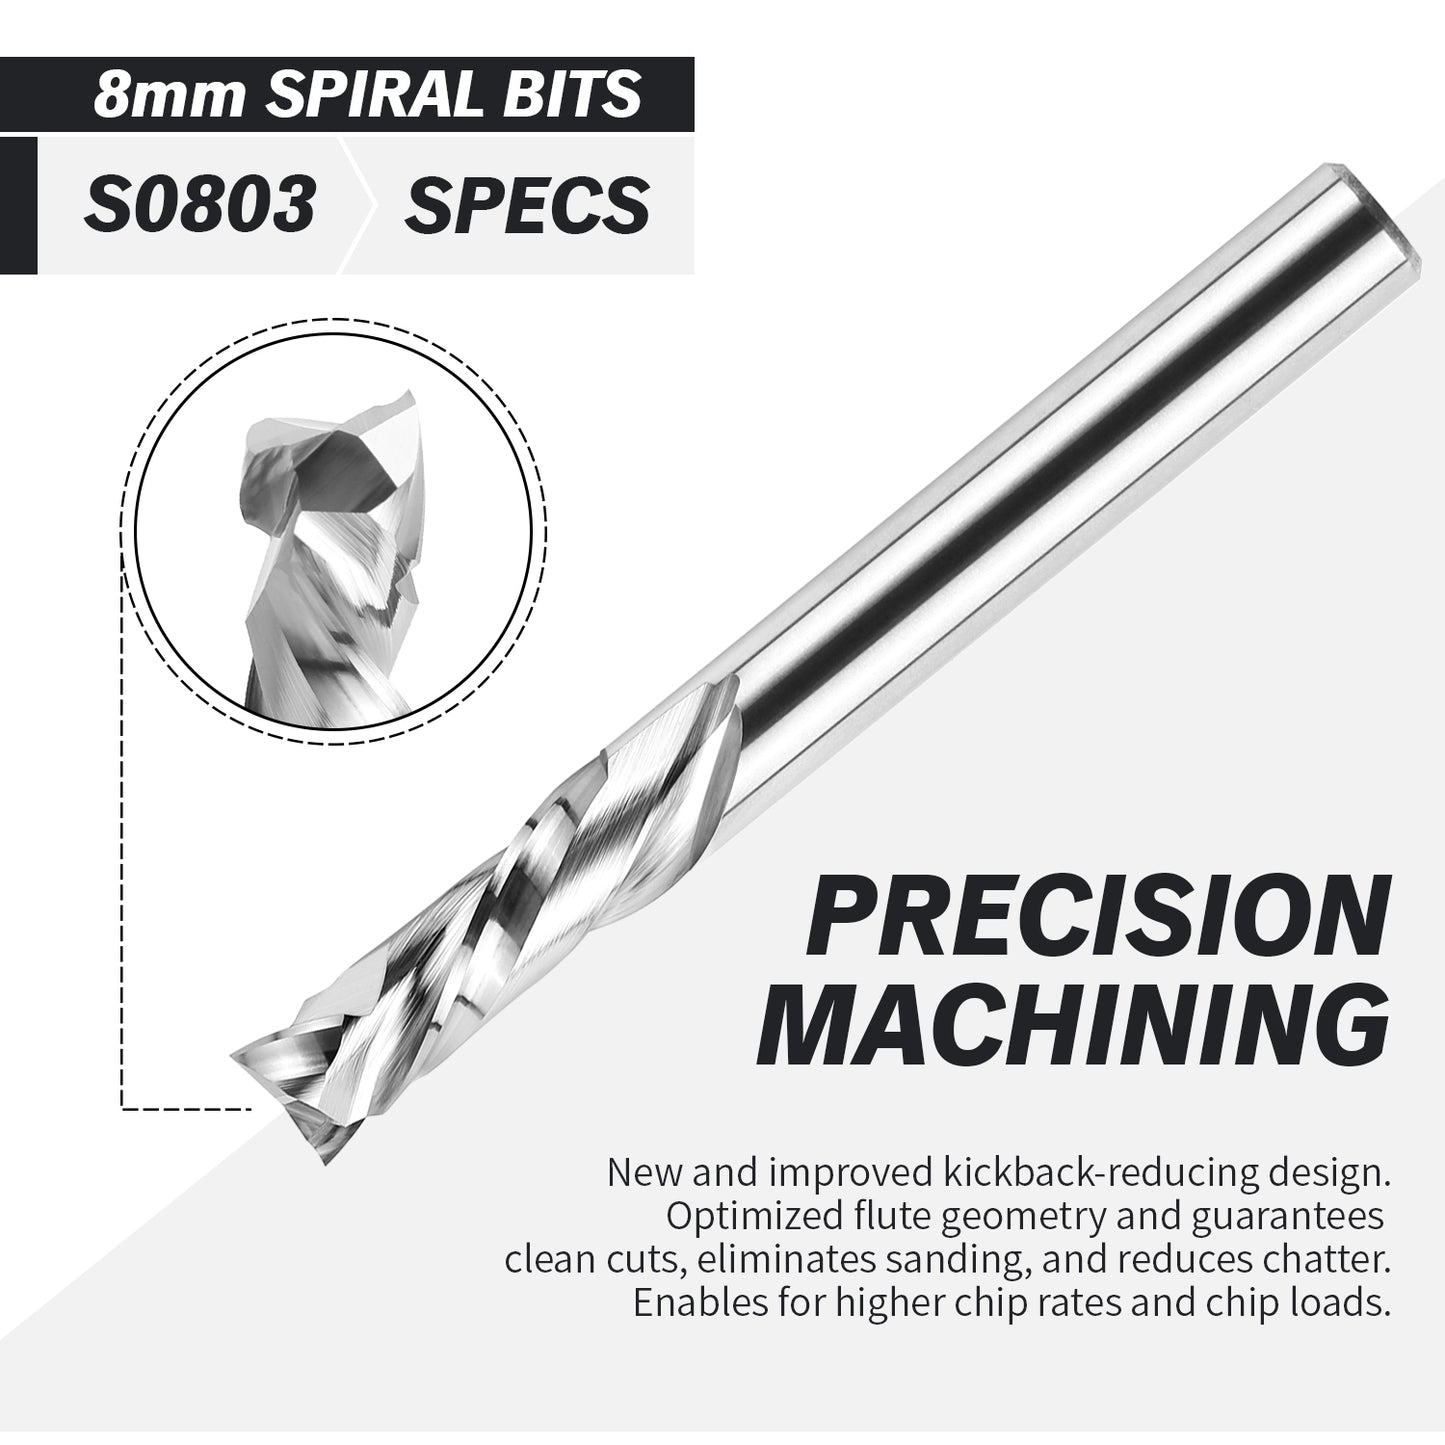 S0803 Solid Carbide Metric Compression Spiral Router Bit - 2 Flutes - 8mm SD - 8mm CD - 25mm CL - 76mm OL - 1/4 UCL